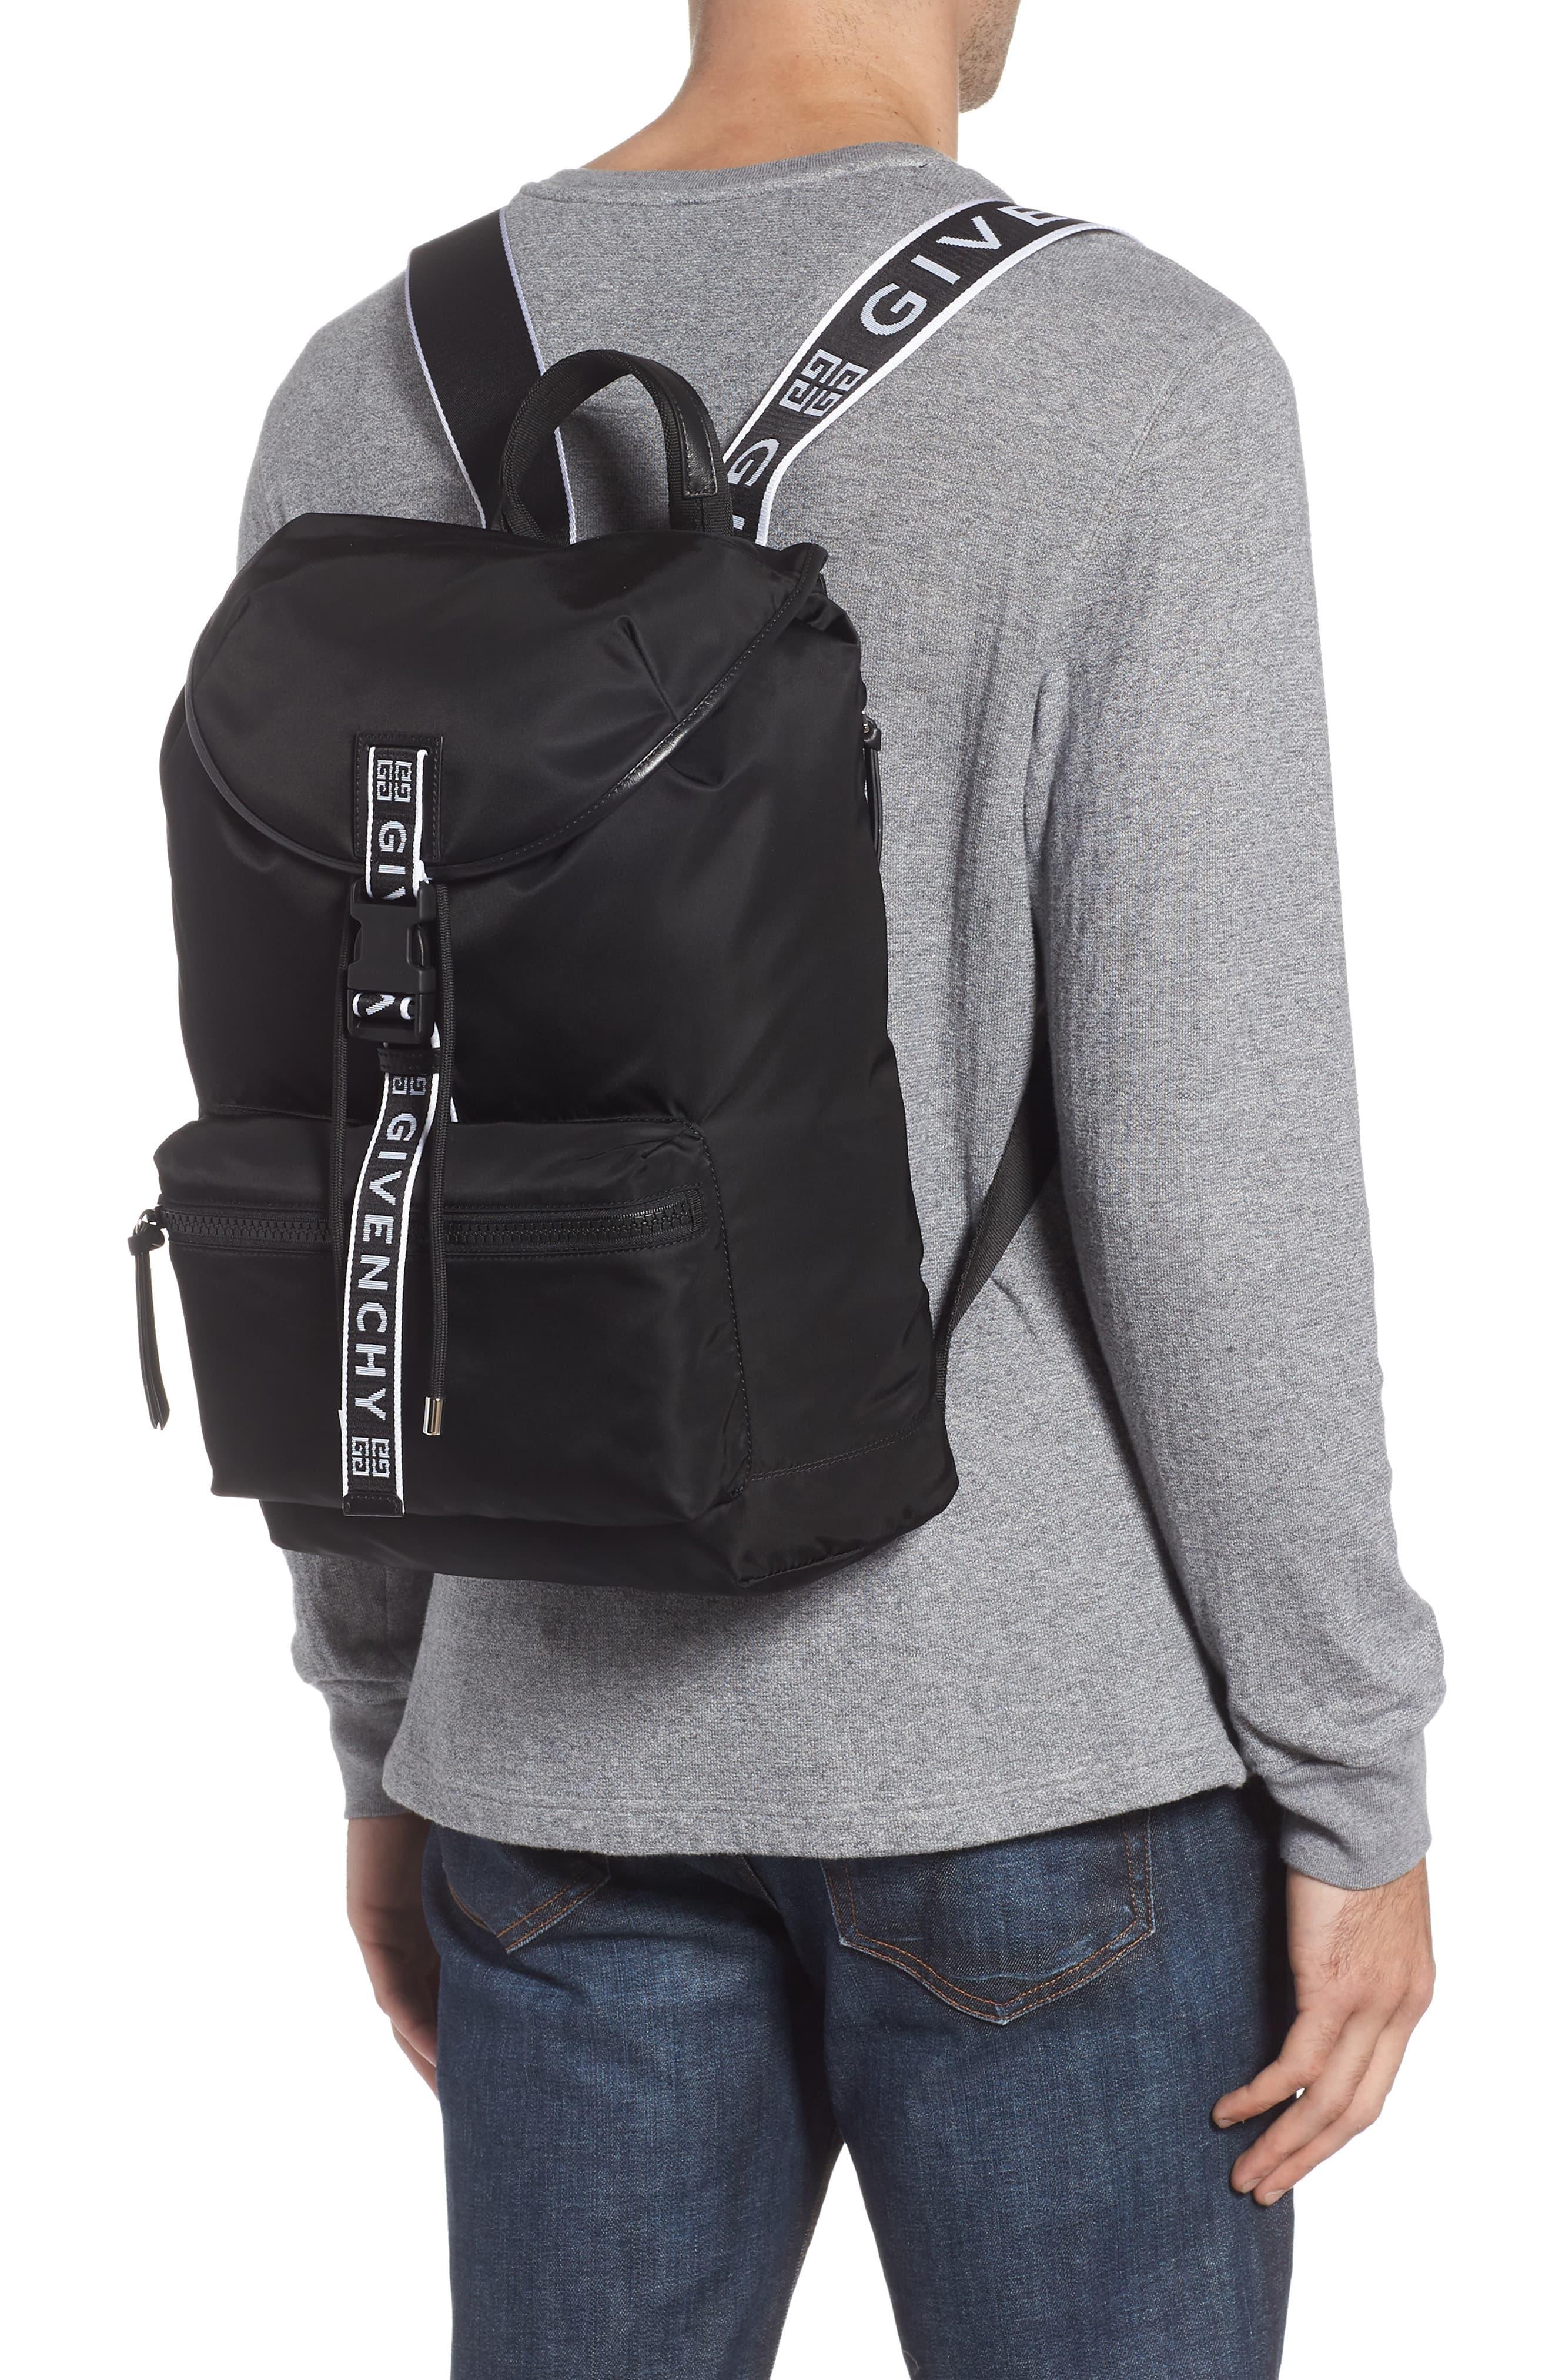 Givenchy Light 3 Backpack - in Black 